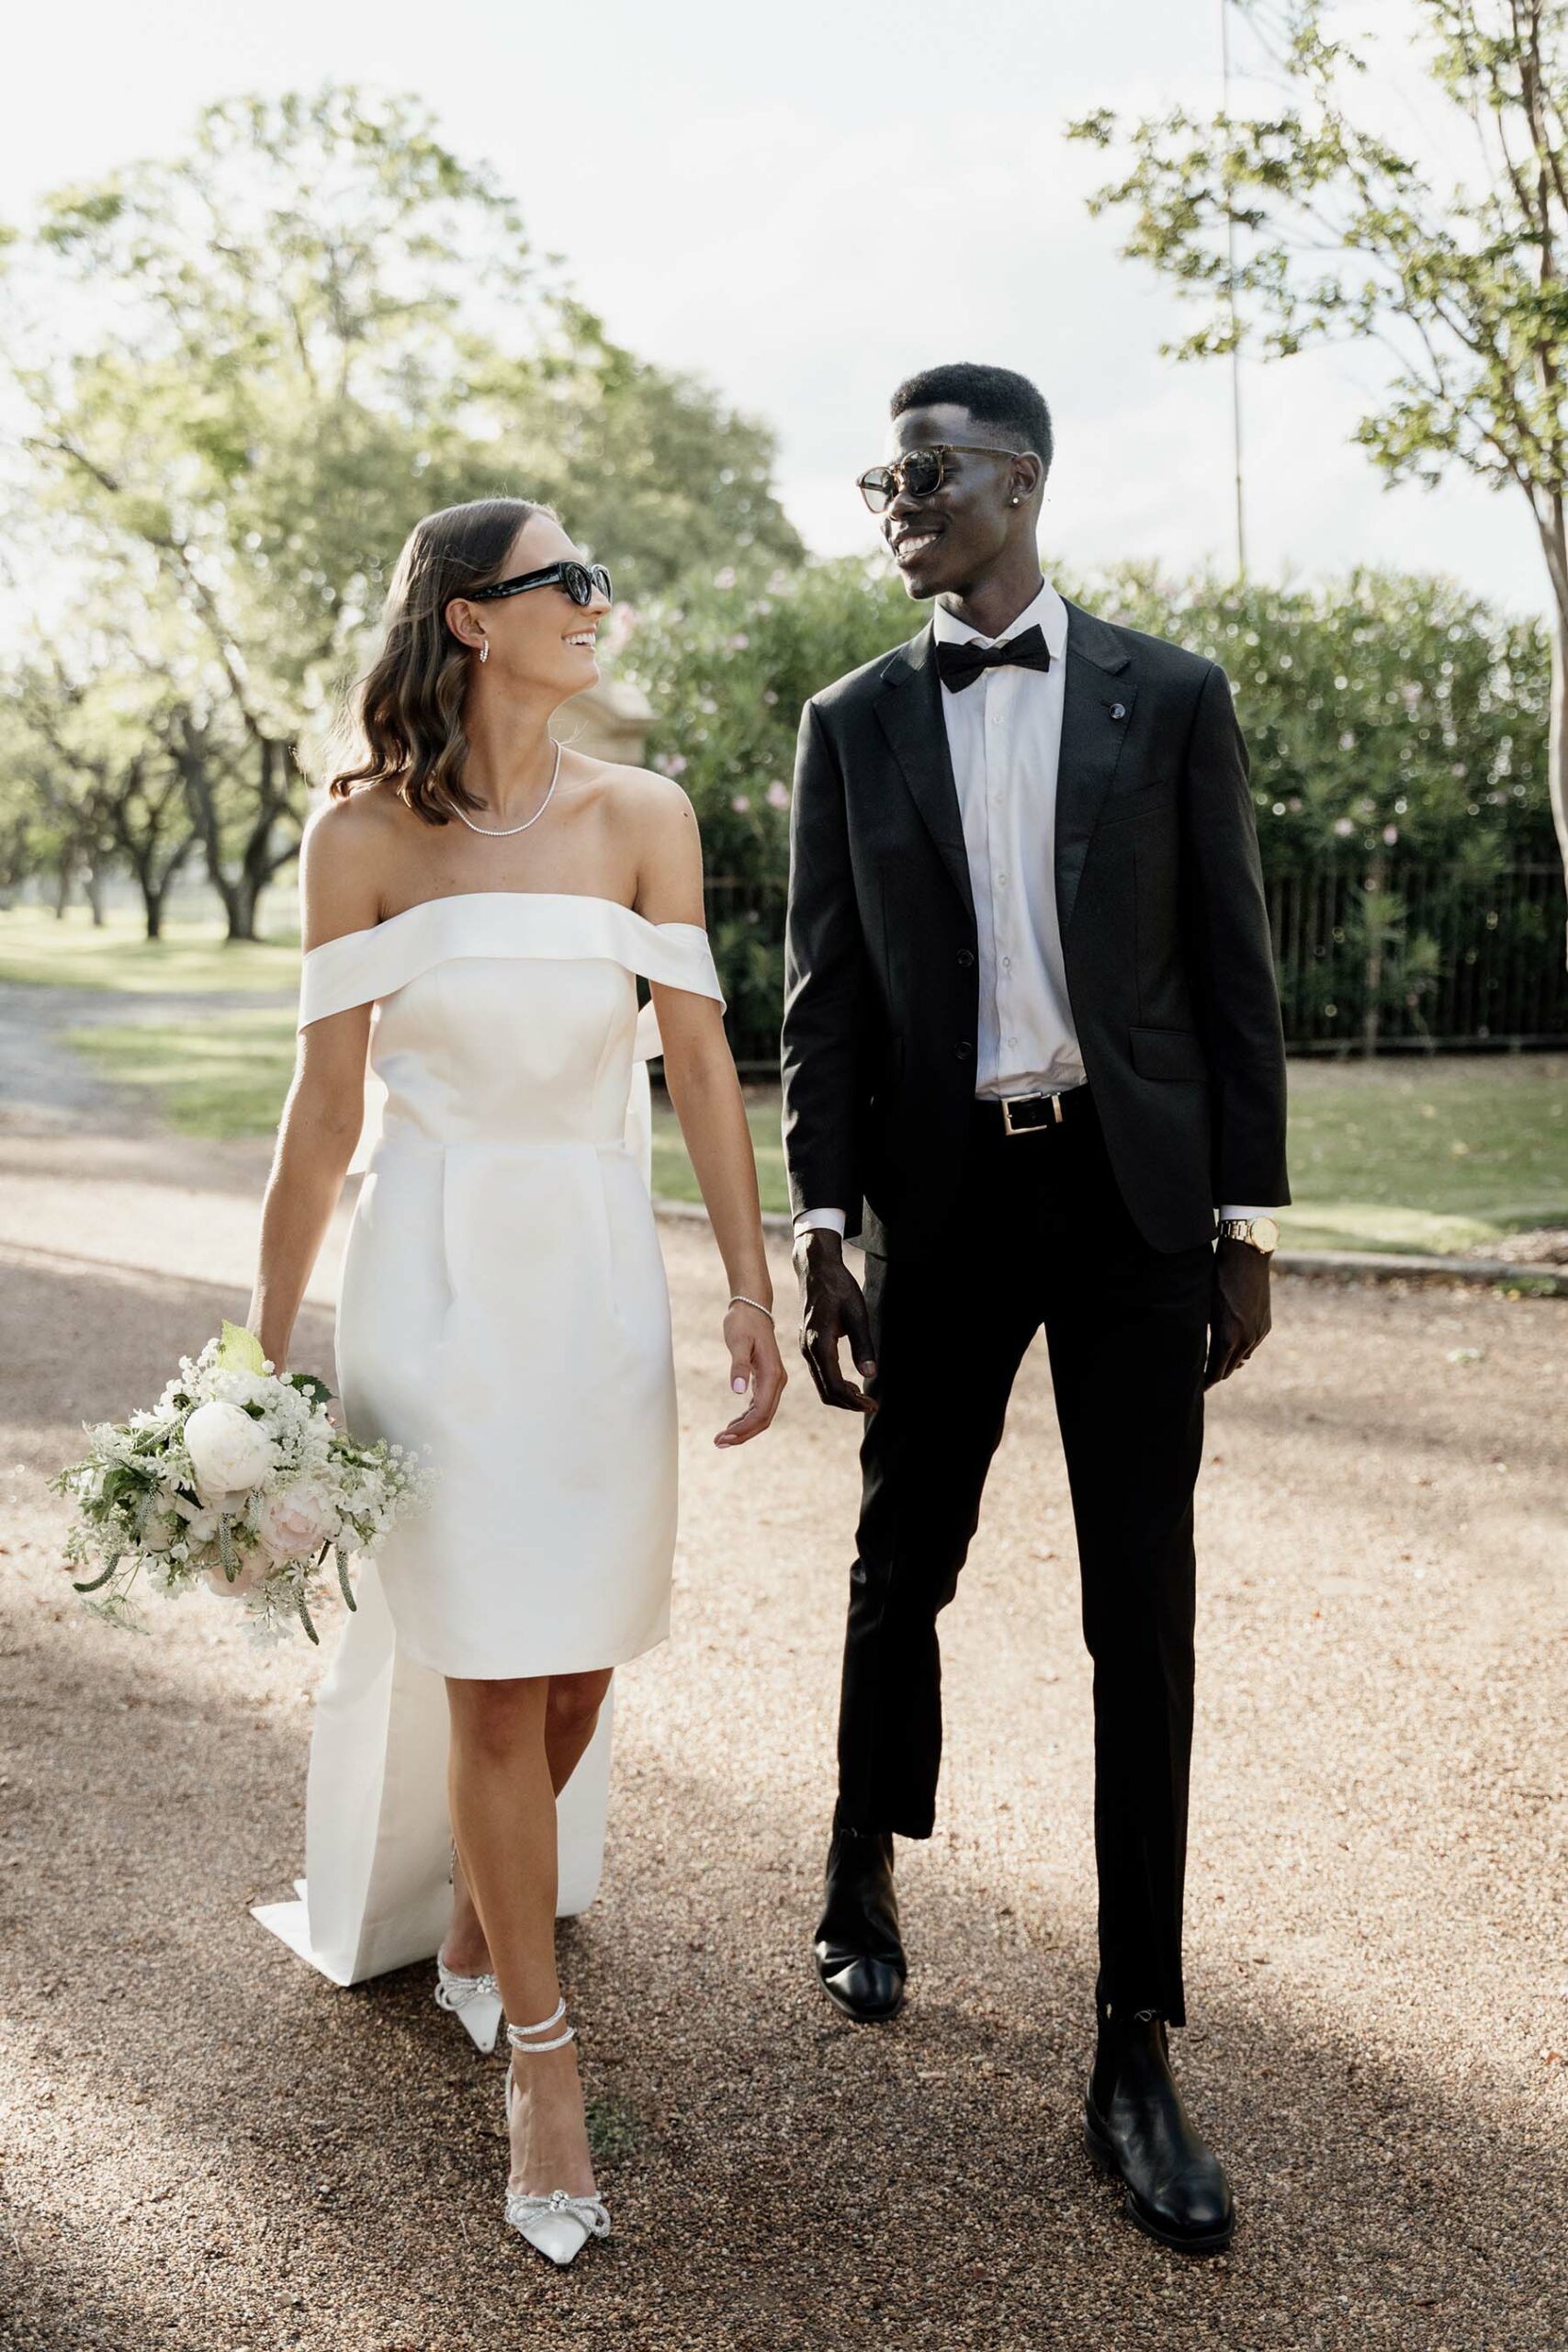 Marry Now, Party Later: A Modern & Fresh Take on The Elopement Trend